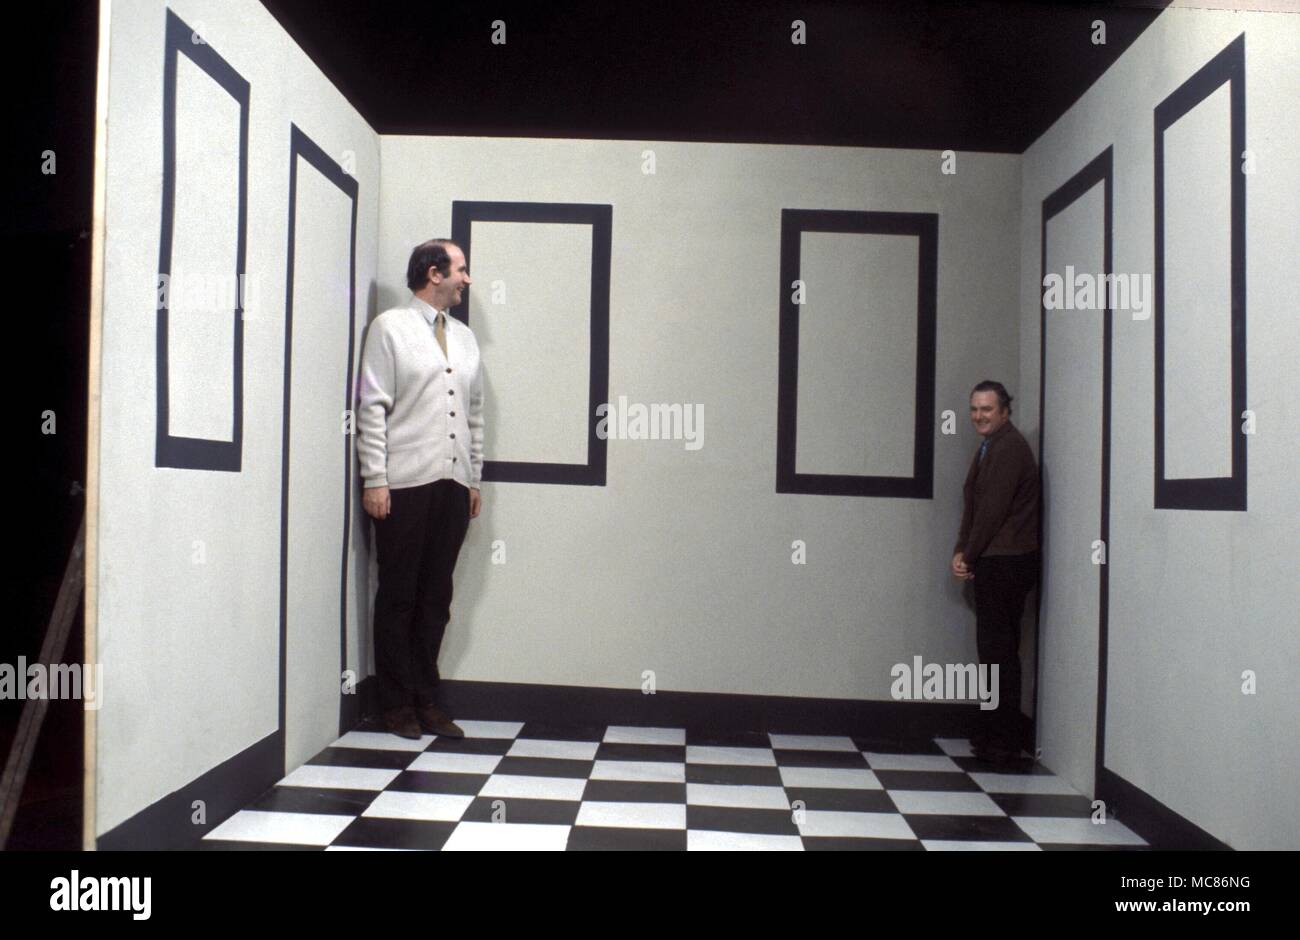 SCIENTIFIC CURIOSITIES Two men standing in an Ames Room, which gives an optical illusion that changes the relative sizes of the men. A further image shows reversal of sizes Stock Photo